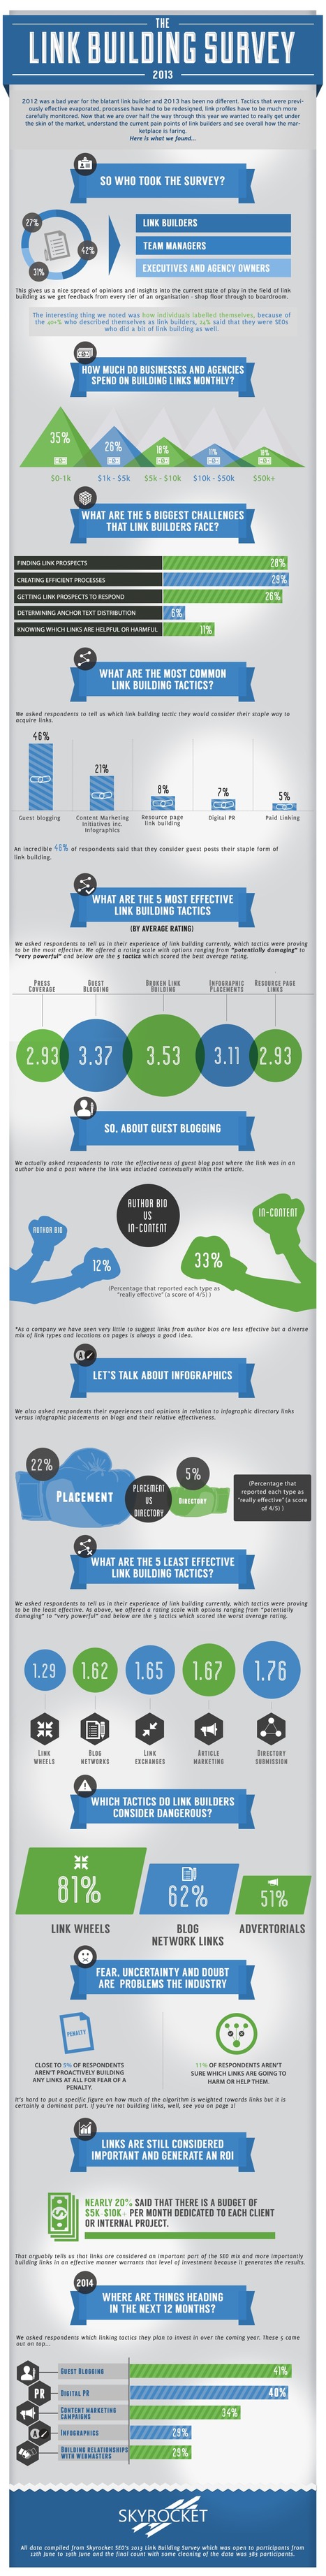 Link Building Survey 2013 - The Results [INFOGRAPHIC] - Moz | The MarTech Digest | Scoop.it